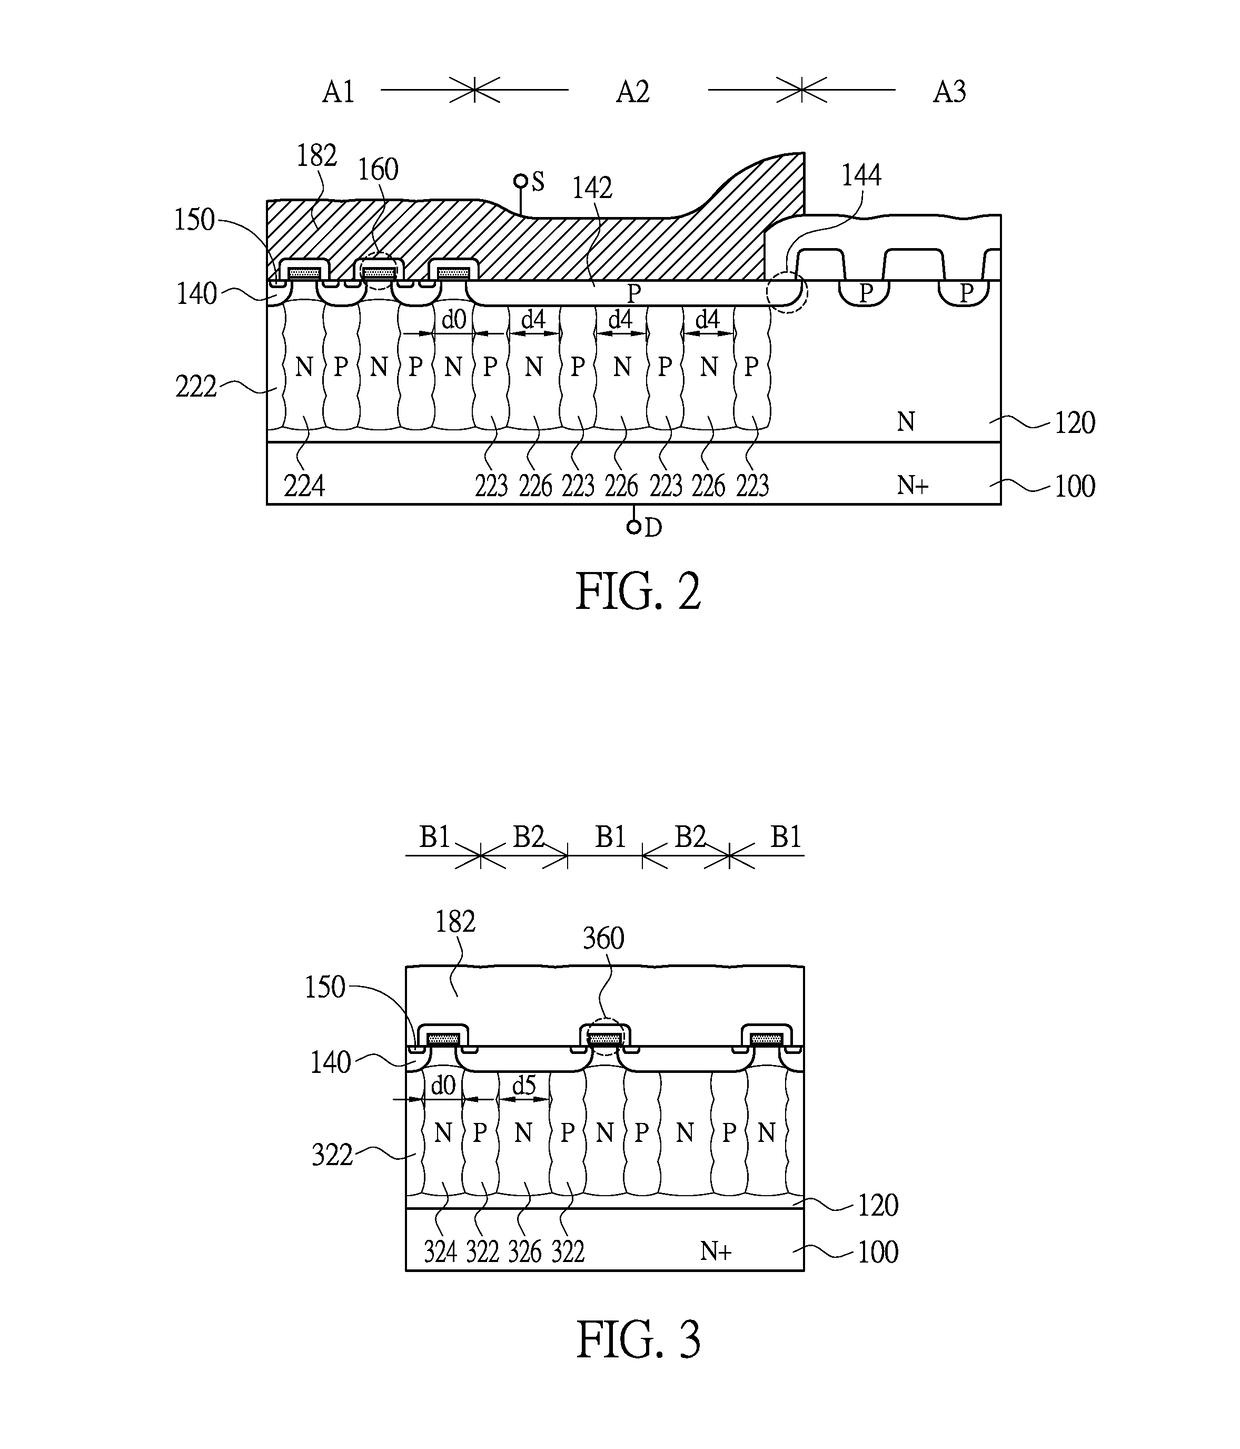 Power metal-oxide-semiconductor device